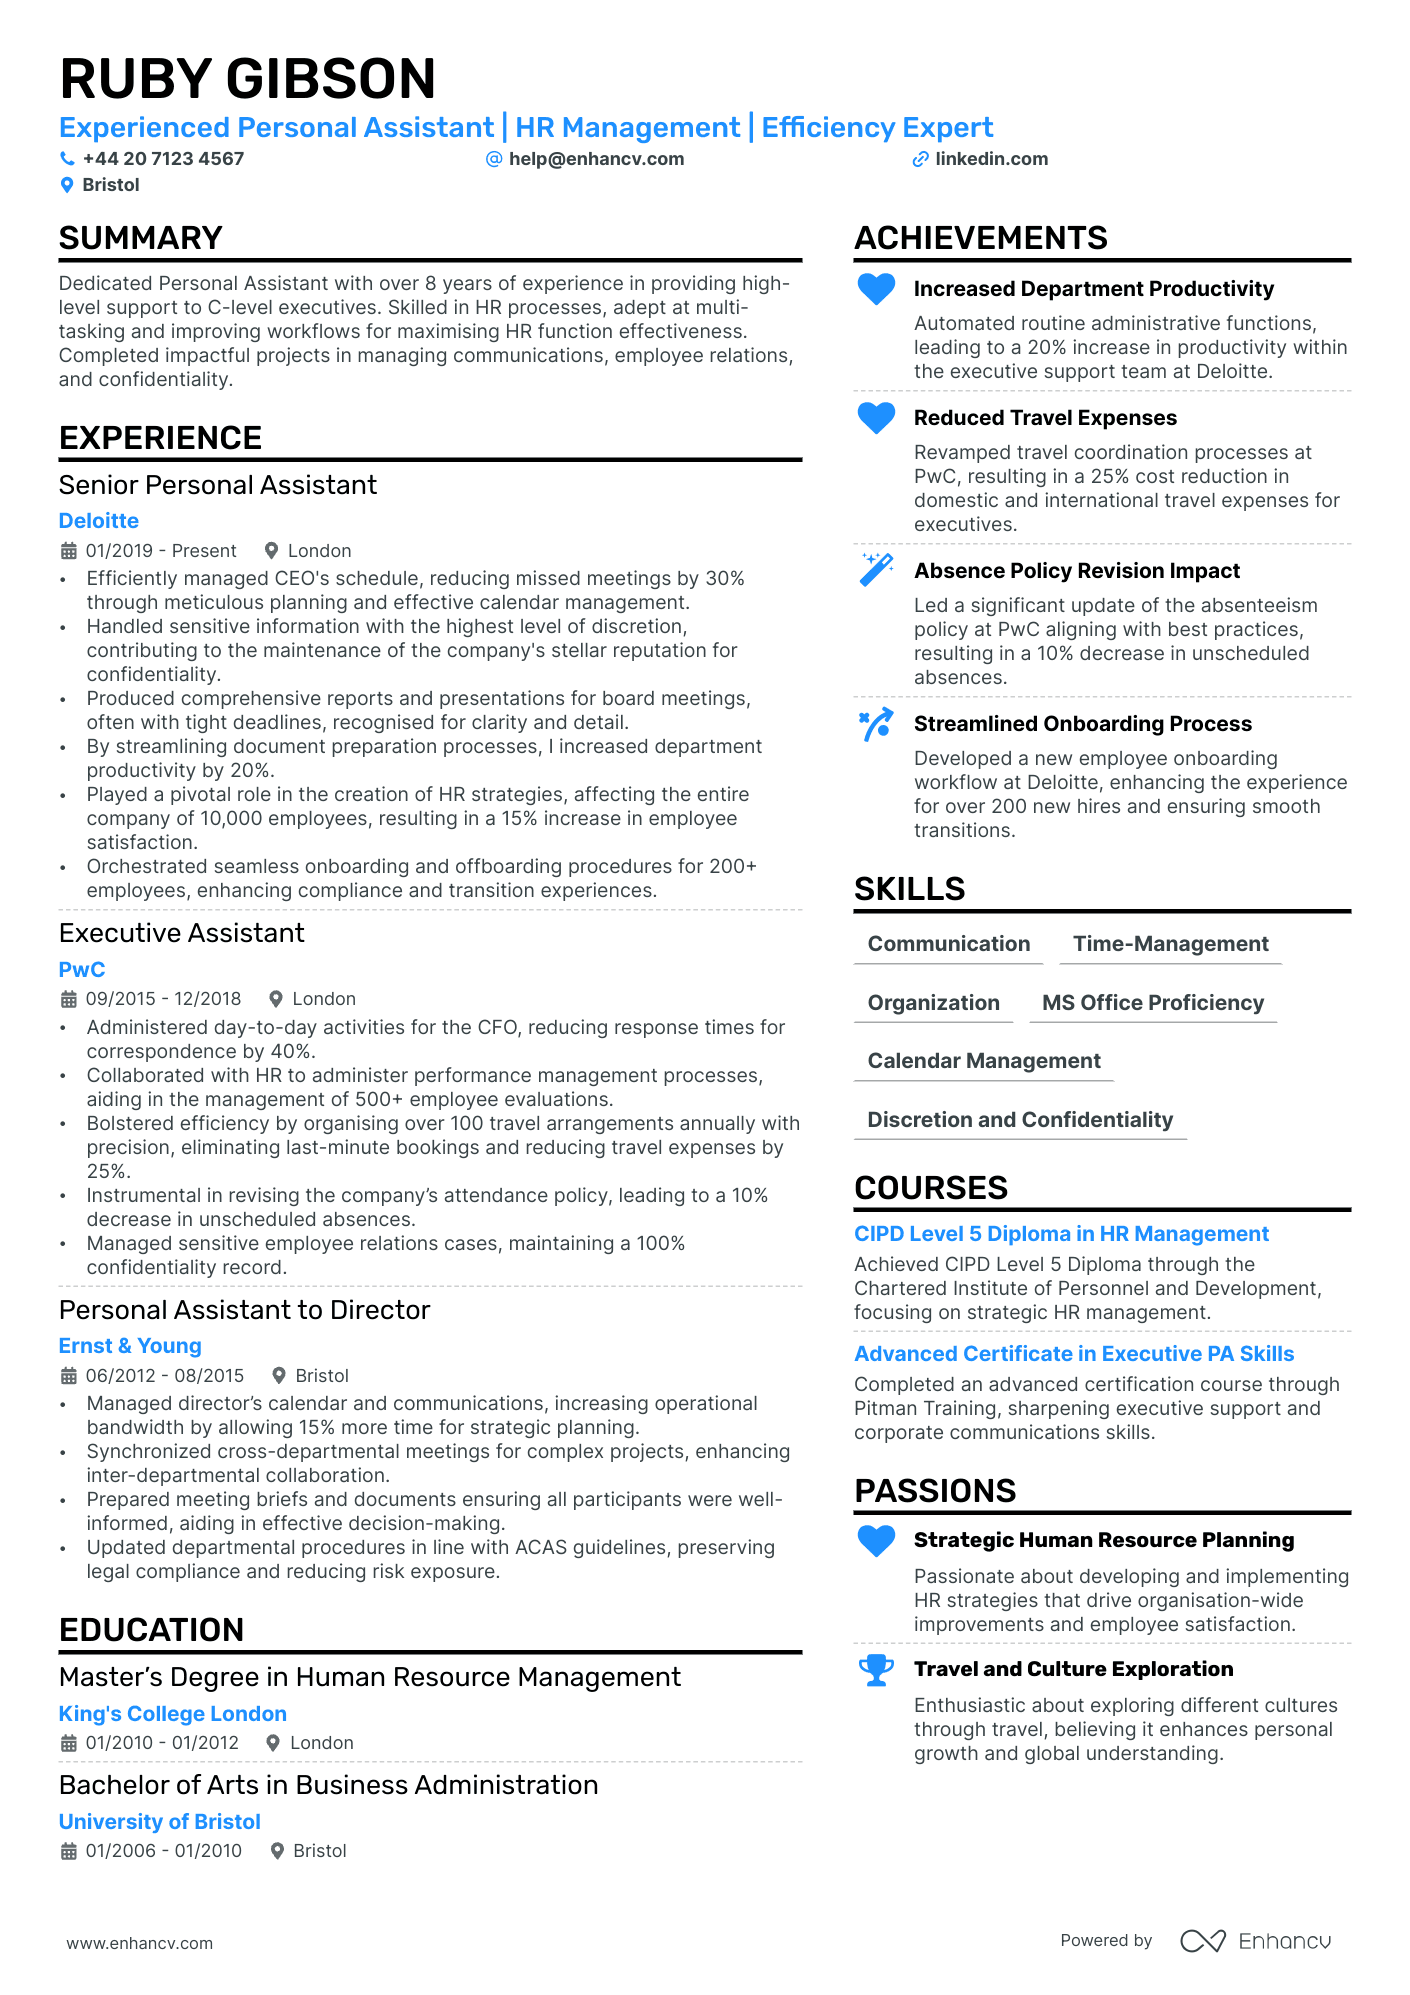 ceo resume example